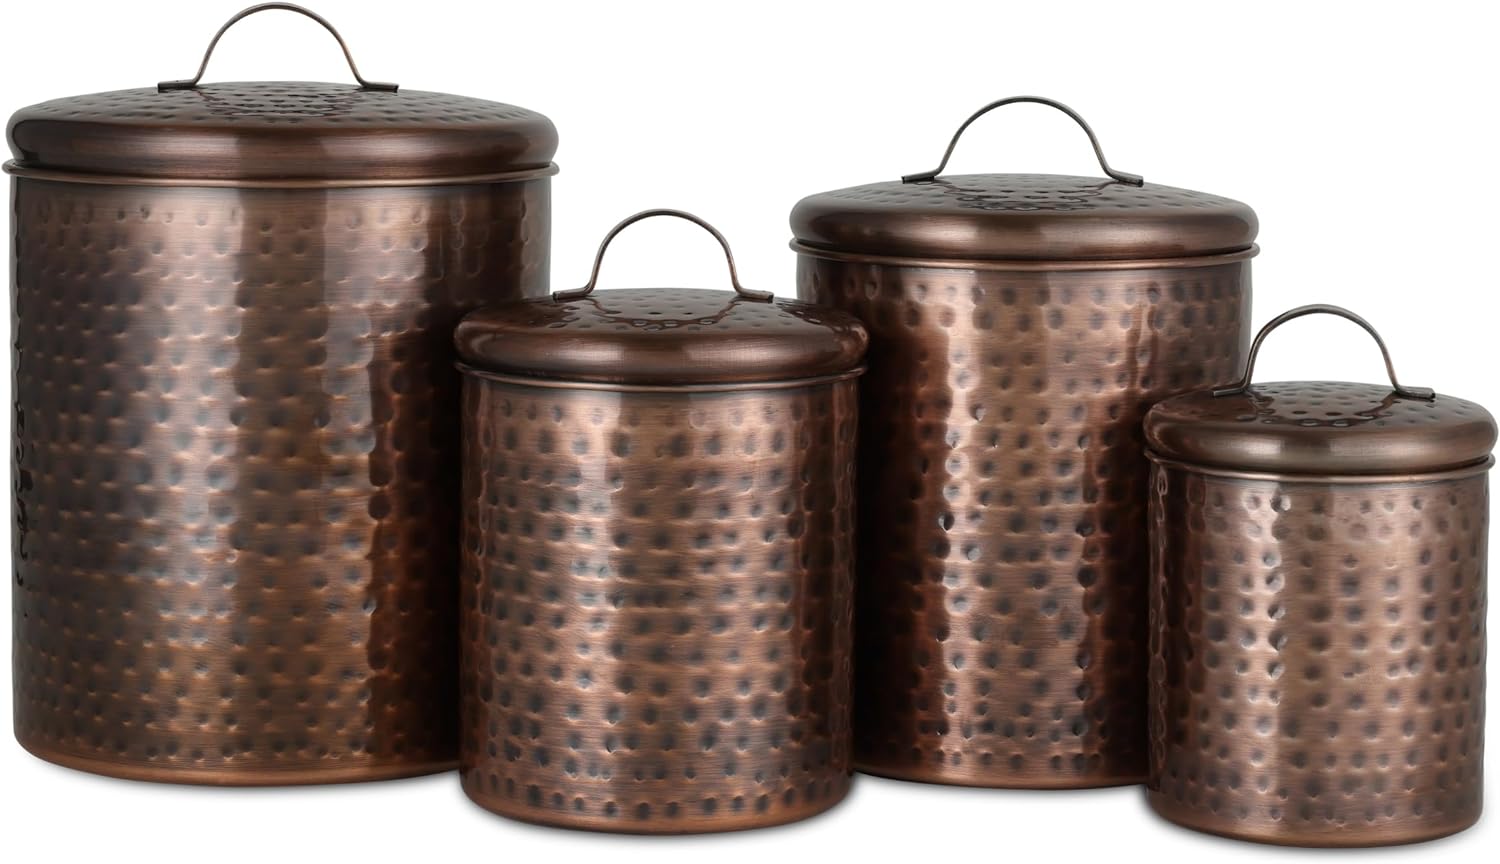 BIRDROCK HOME 4pc Canister Set | Hammered Antique Copper | Fitted Lid | Farmhouse Décor | Rustic Metal Storage Canisters for Kitchen Countertop